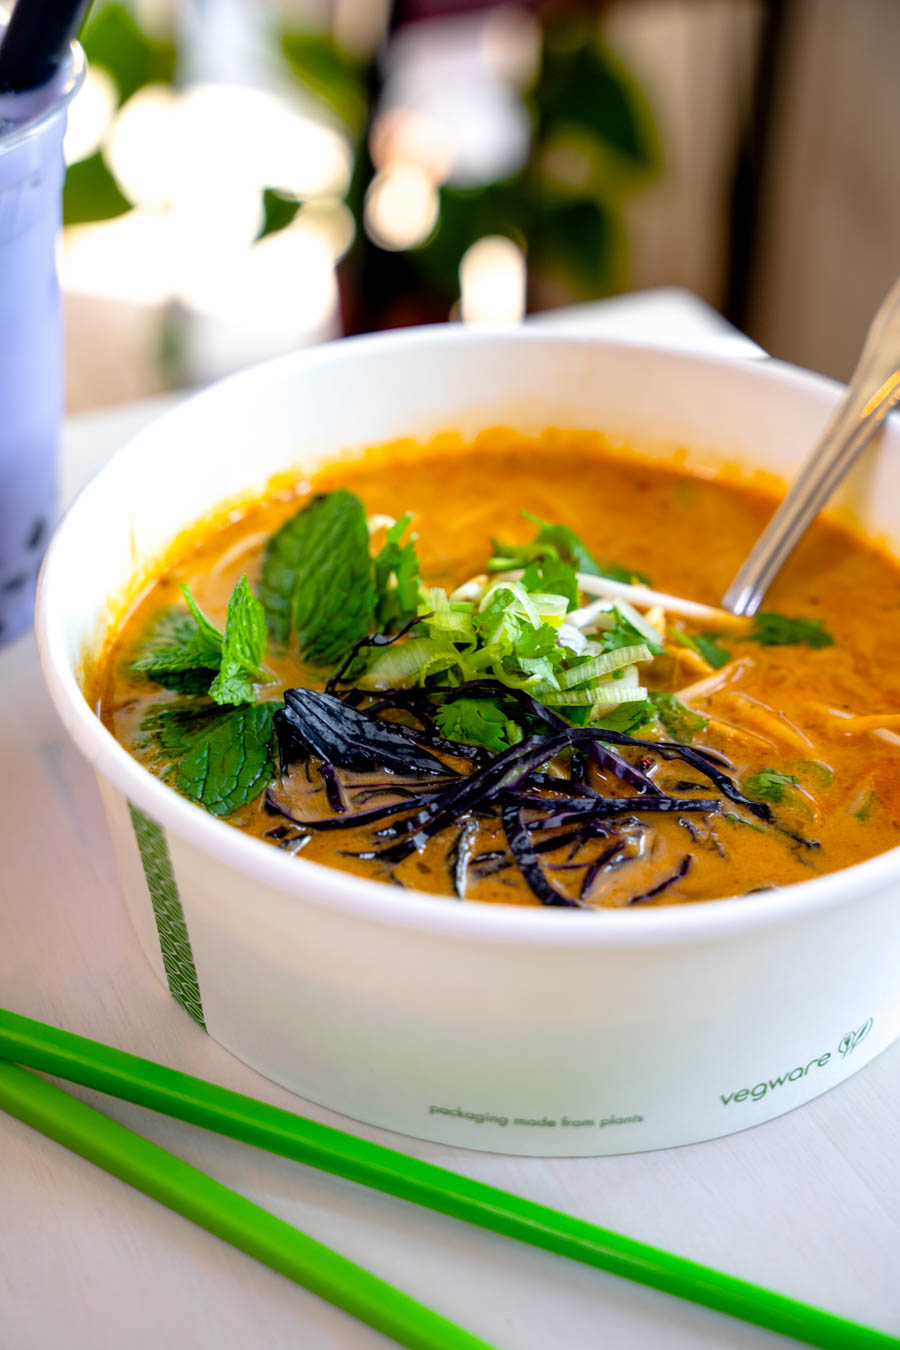  The Lao curry noodle soup that put A Taste of Asia on the map returns as a customizable dish that now comes as a vegan option.